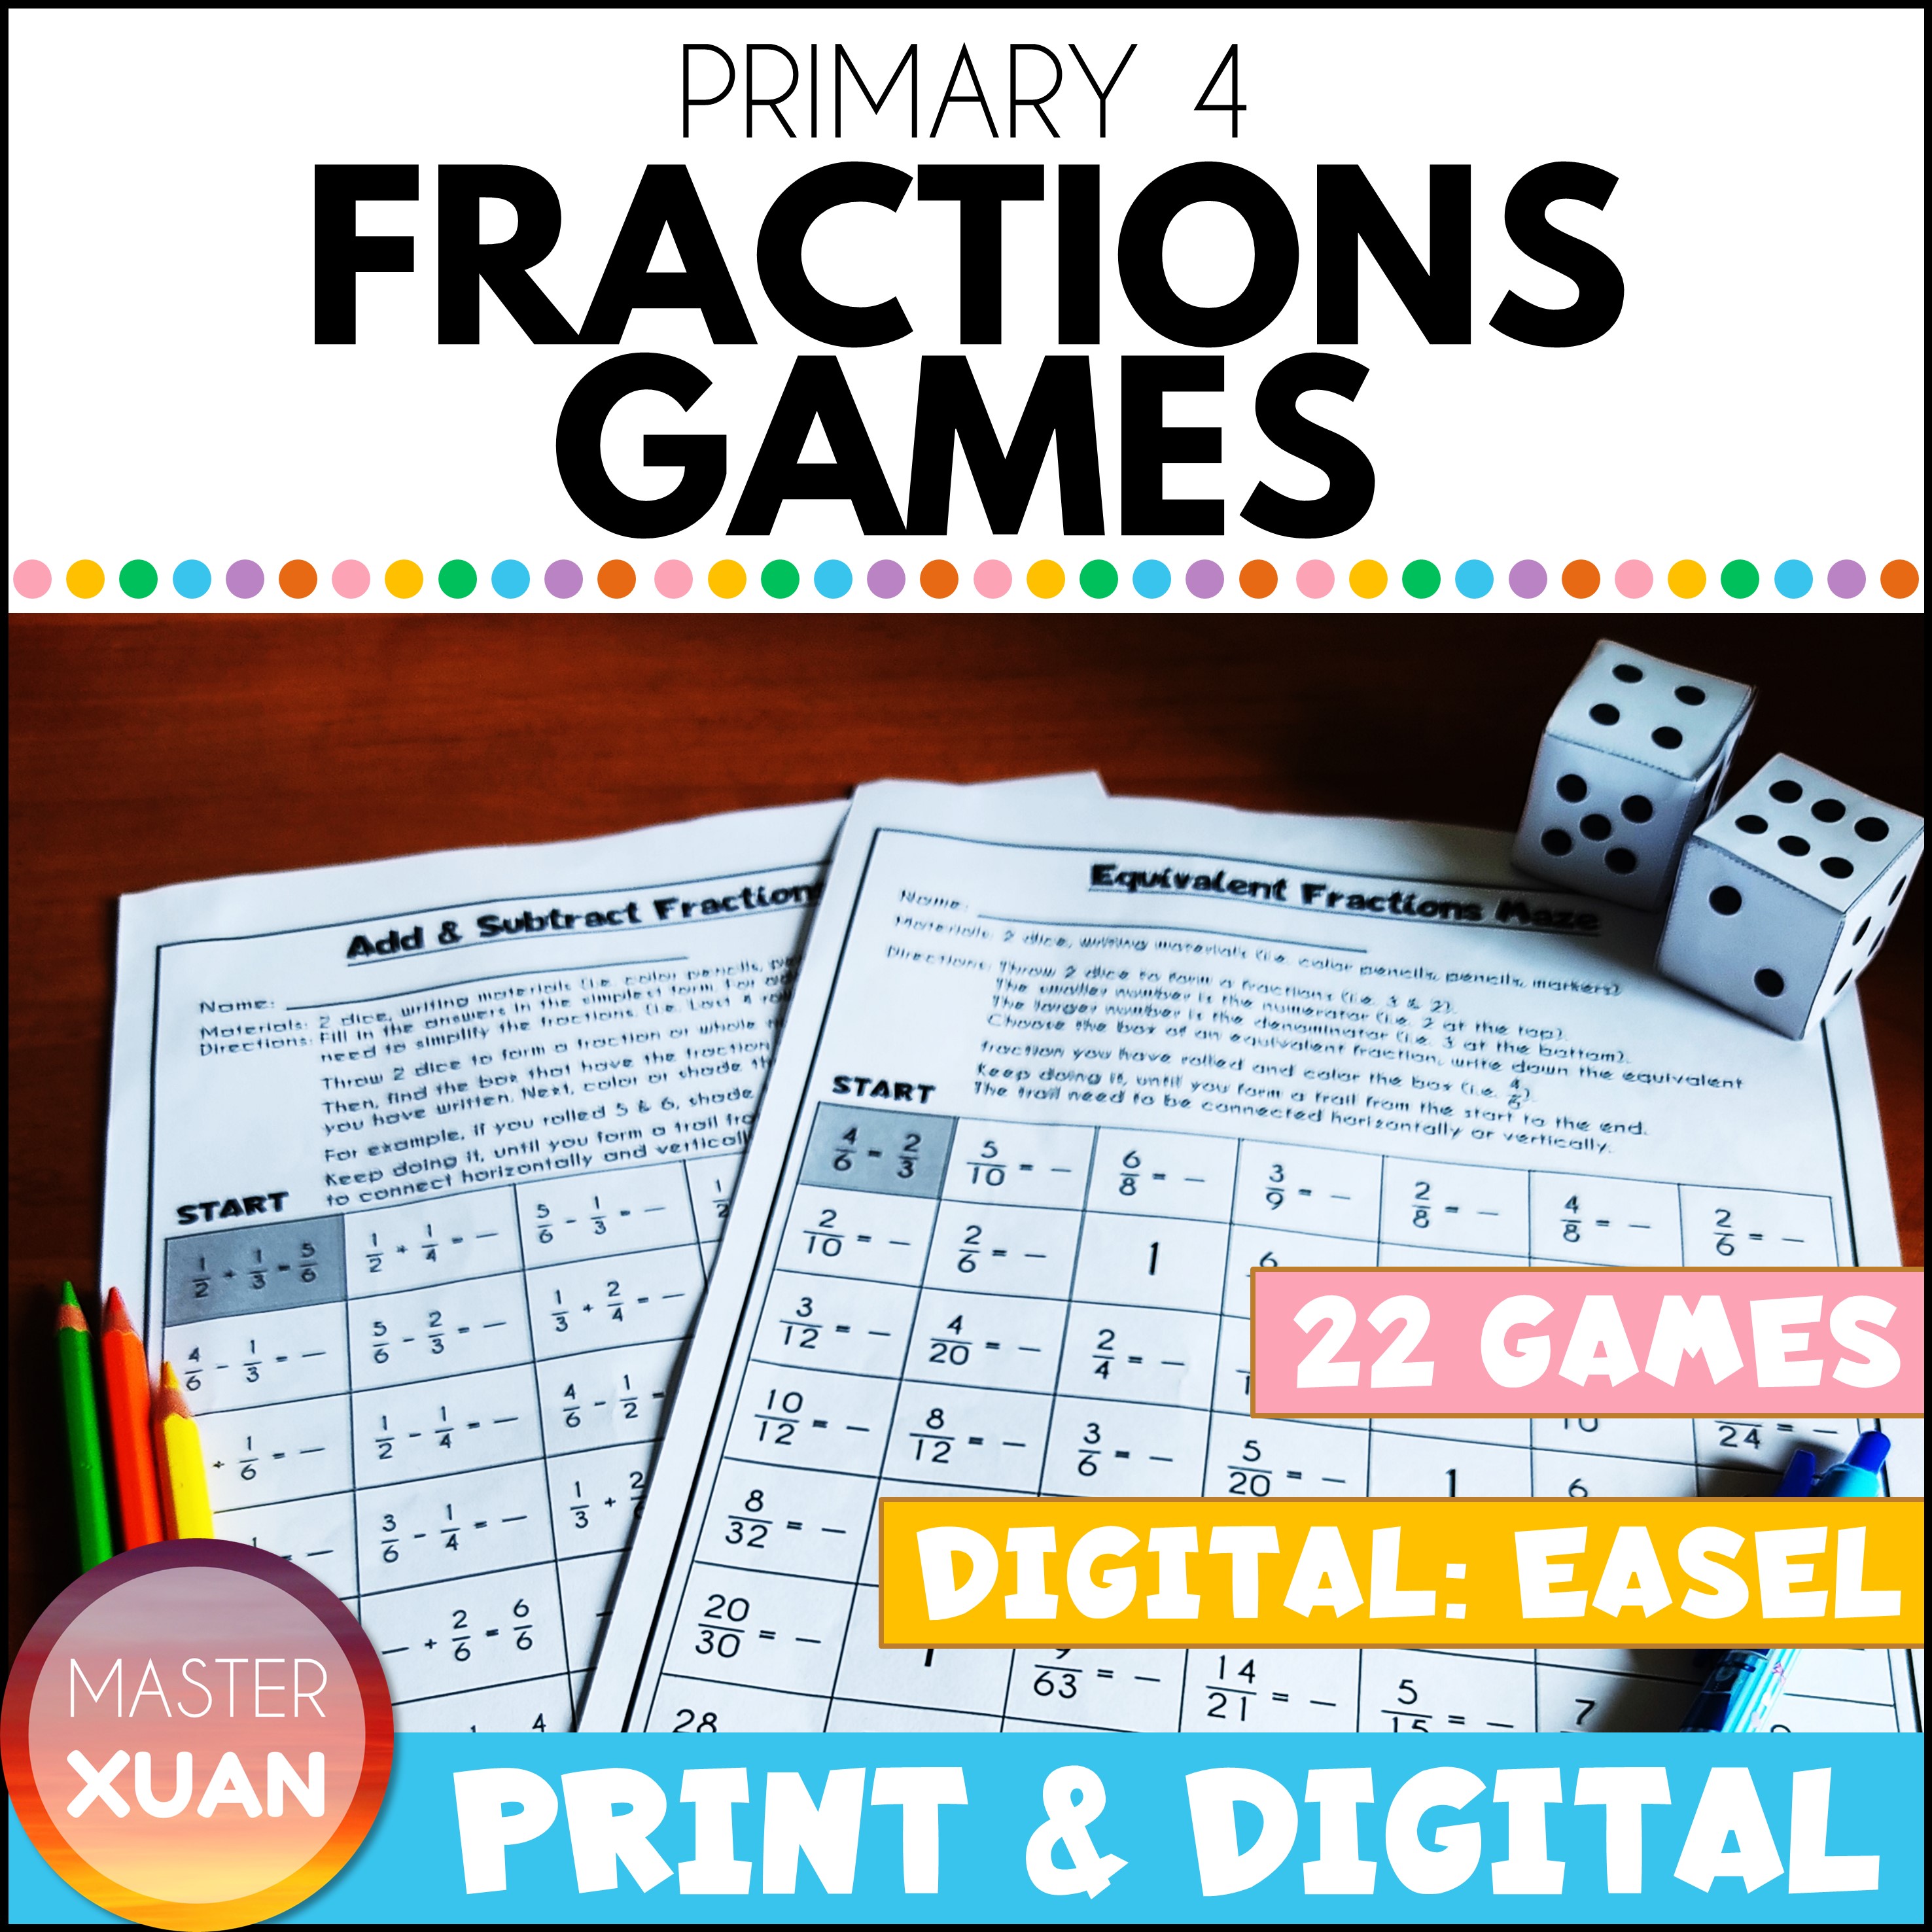 games for fractions for primary 4